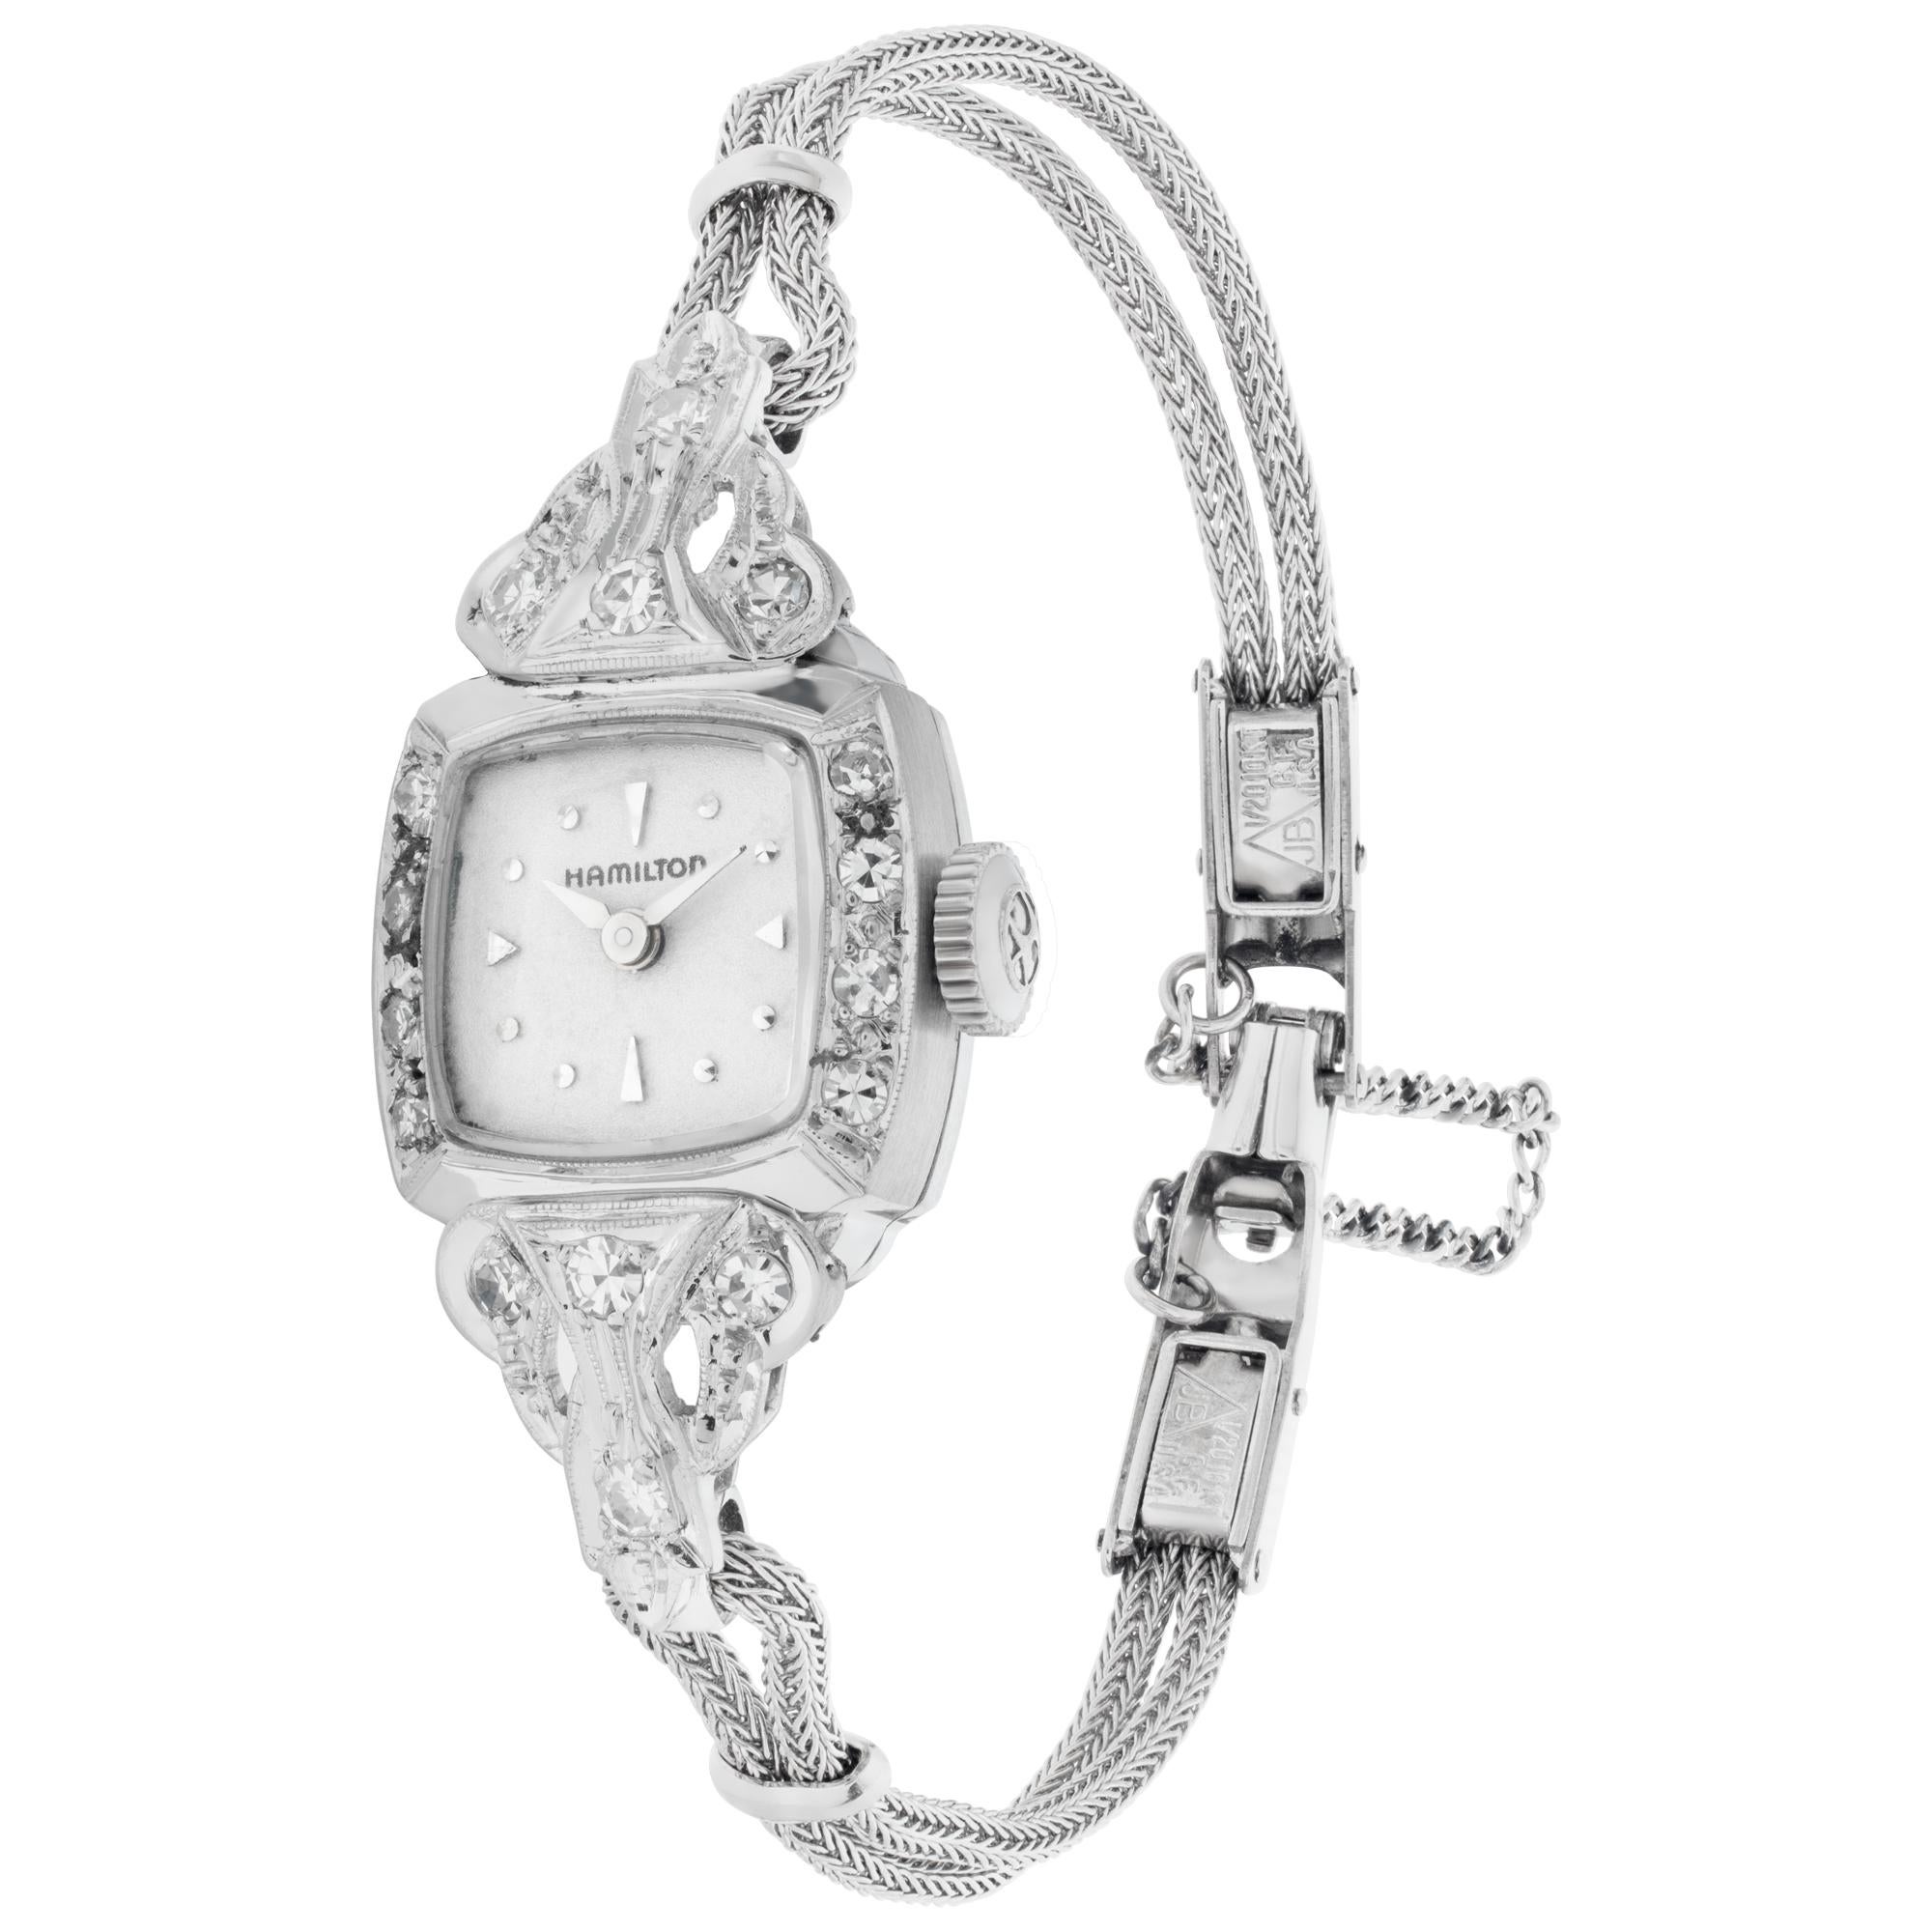 Hamilton Cocktail watch in 14k white gold and 0.45 carats in diamond accents G-H color, VS-SI clarity. Manual. 22 Jewels. Case size 15mm. Circa 1950s. Fine Pre-owned Hamilton Watch. Certified preowned Vintage Hamilton Cocktail watch is made out of